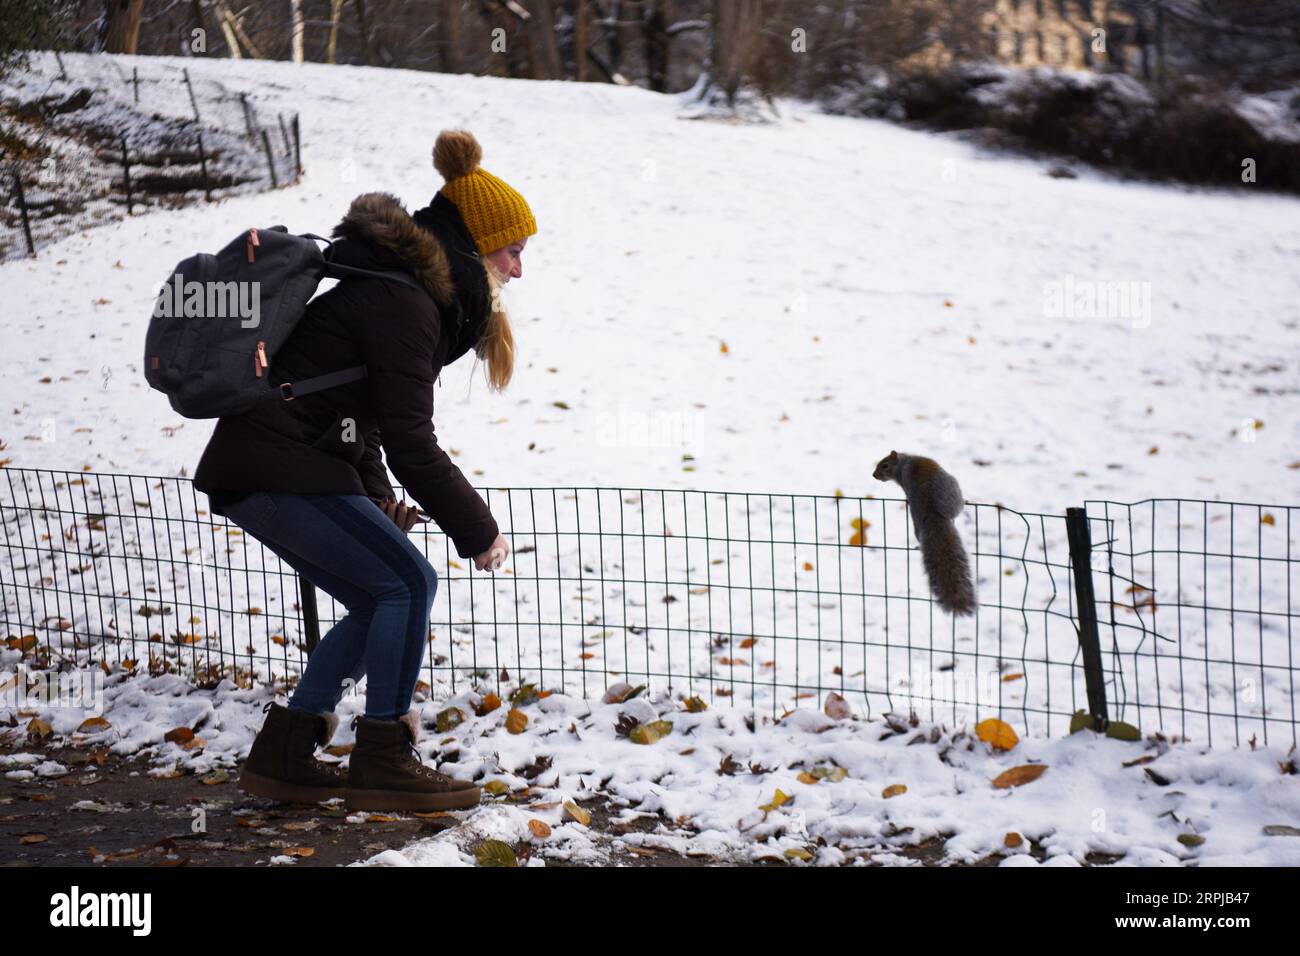 191203 -- NEW YORK, Dec. 3, 2019 -- A visitor interacts with a squirrel after a snowfall in Central Park in New York, the United States, on Dec. 3, 2019. The first snowfall of the season hit New York City on Monday.  U.S.-NEW YORK-CENTRAL PARK-SNOW HanxFang PUBLICATIONxNOTxINxCHN Stock Photo